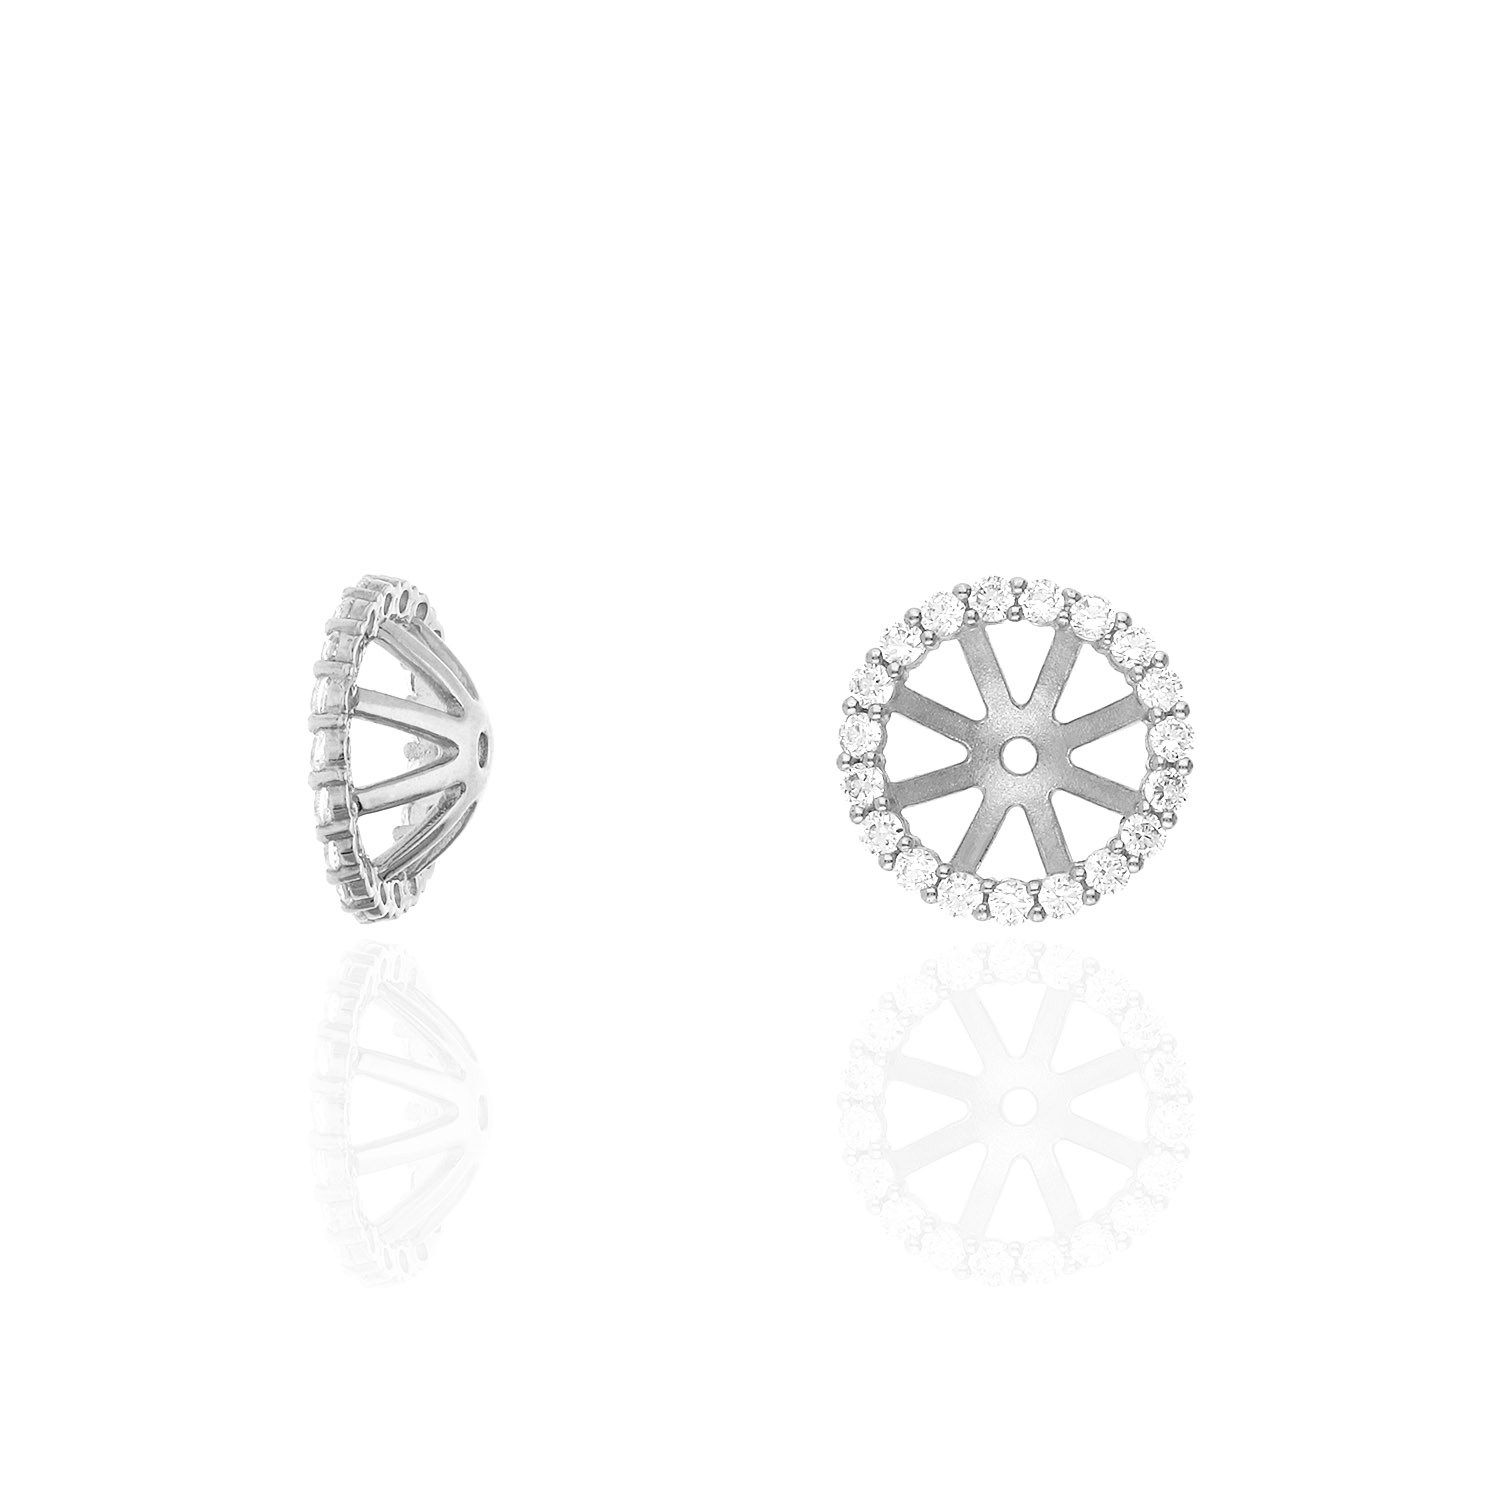 14K White Gold Created Diamond Halo Earring Jackets And Studs - image 2 of 5